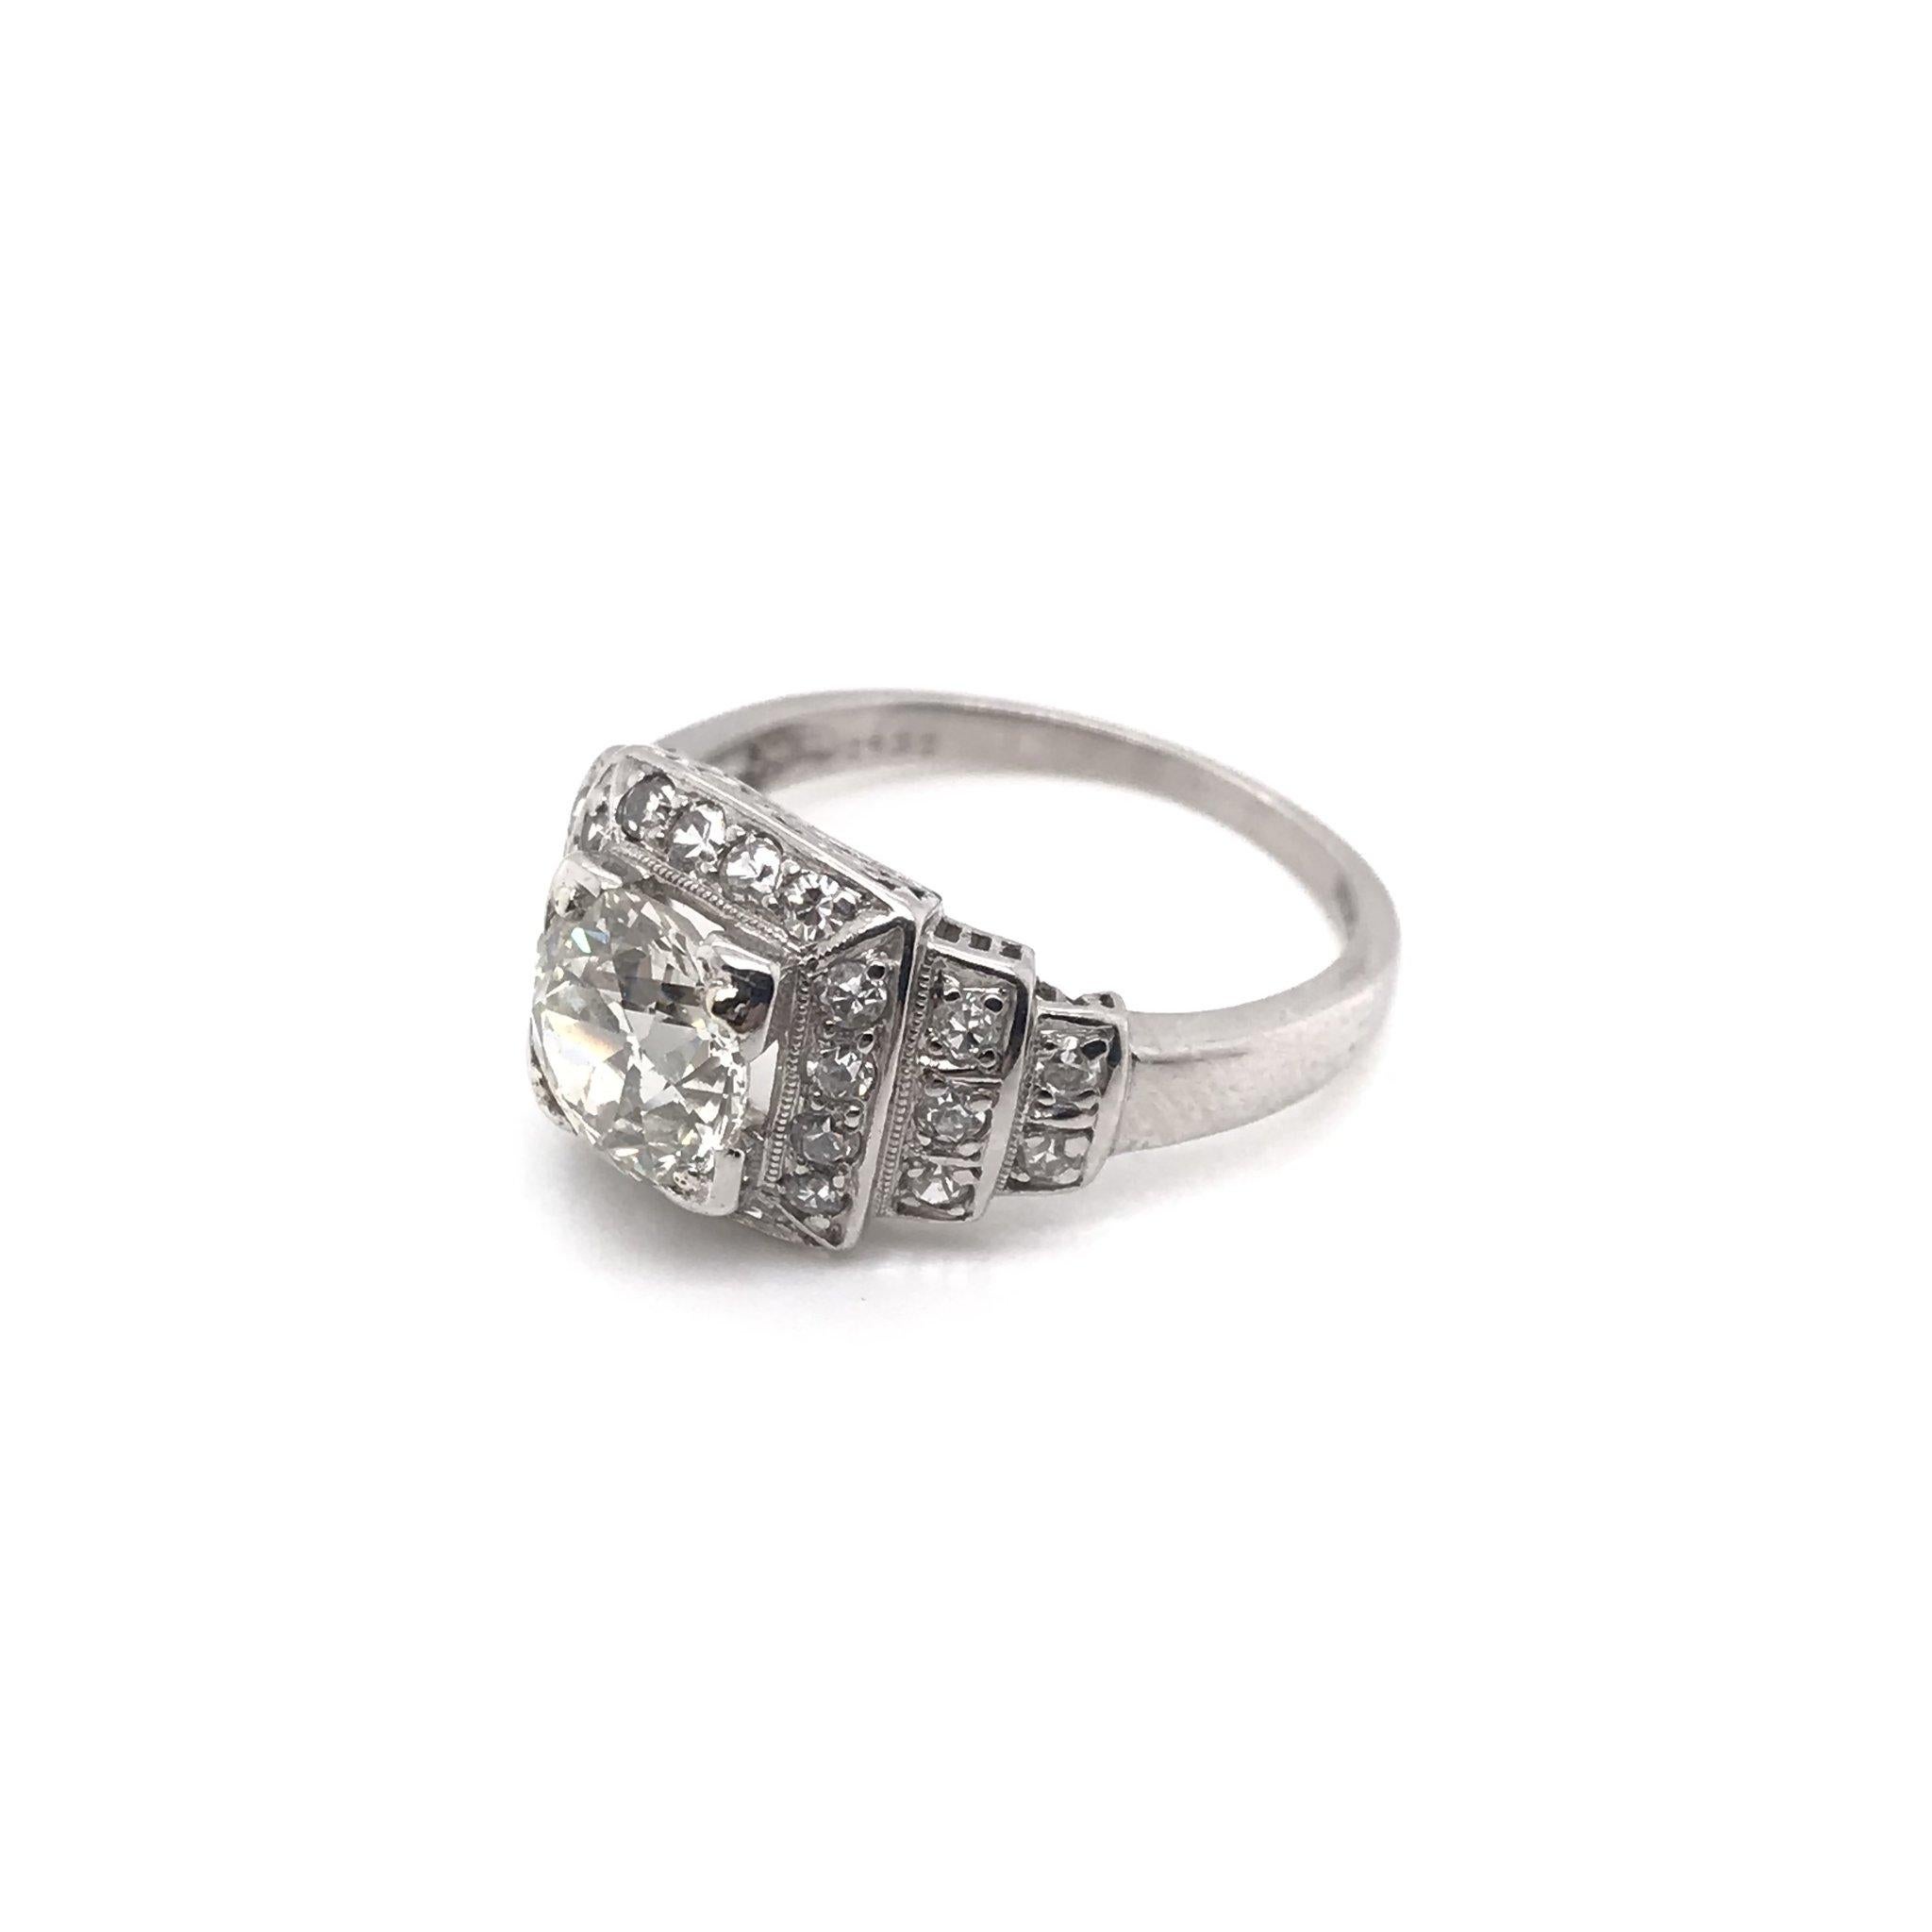 This piece was crafted sometime during the Retro design period ( 1940-1960 ). The setting is platinum and features a beautiful 1.15 carat center diamond. The center European Cut diamond grades approximately L in color, SI2 in clarity. The setting